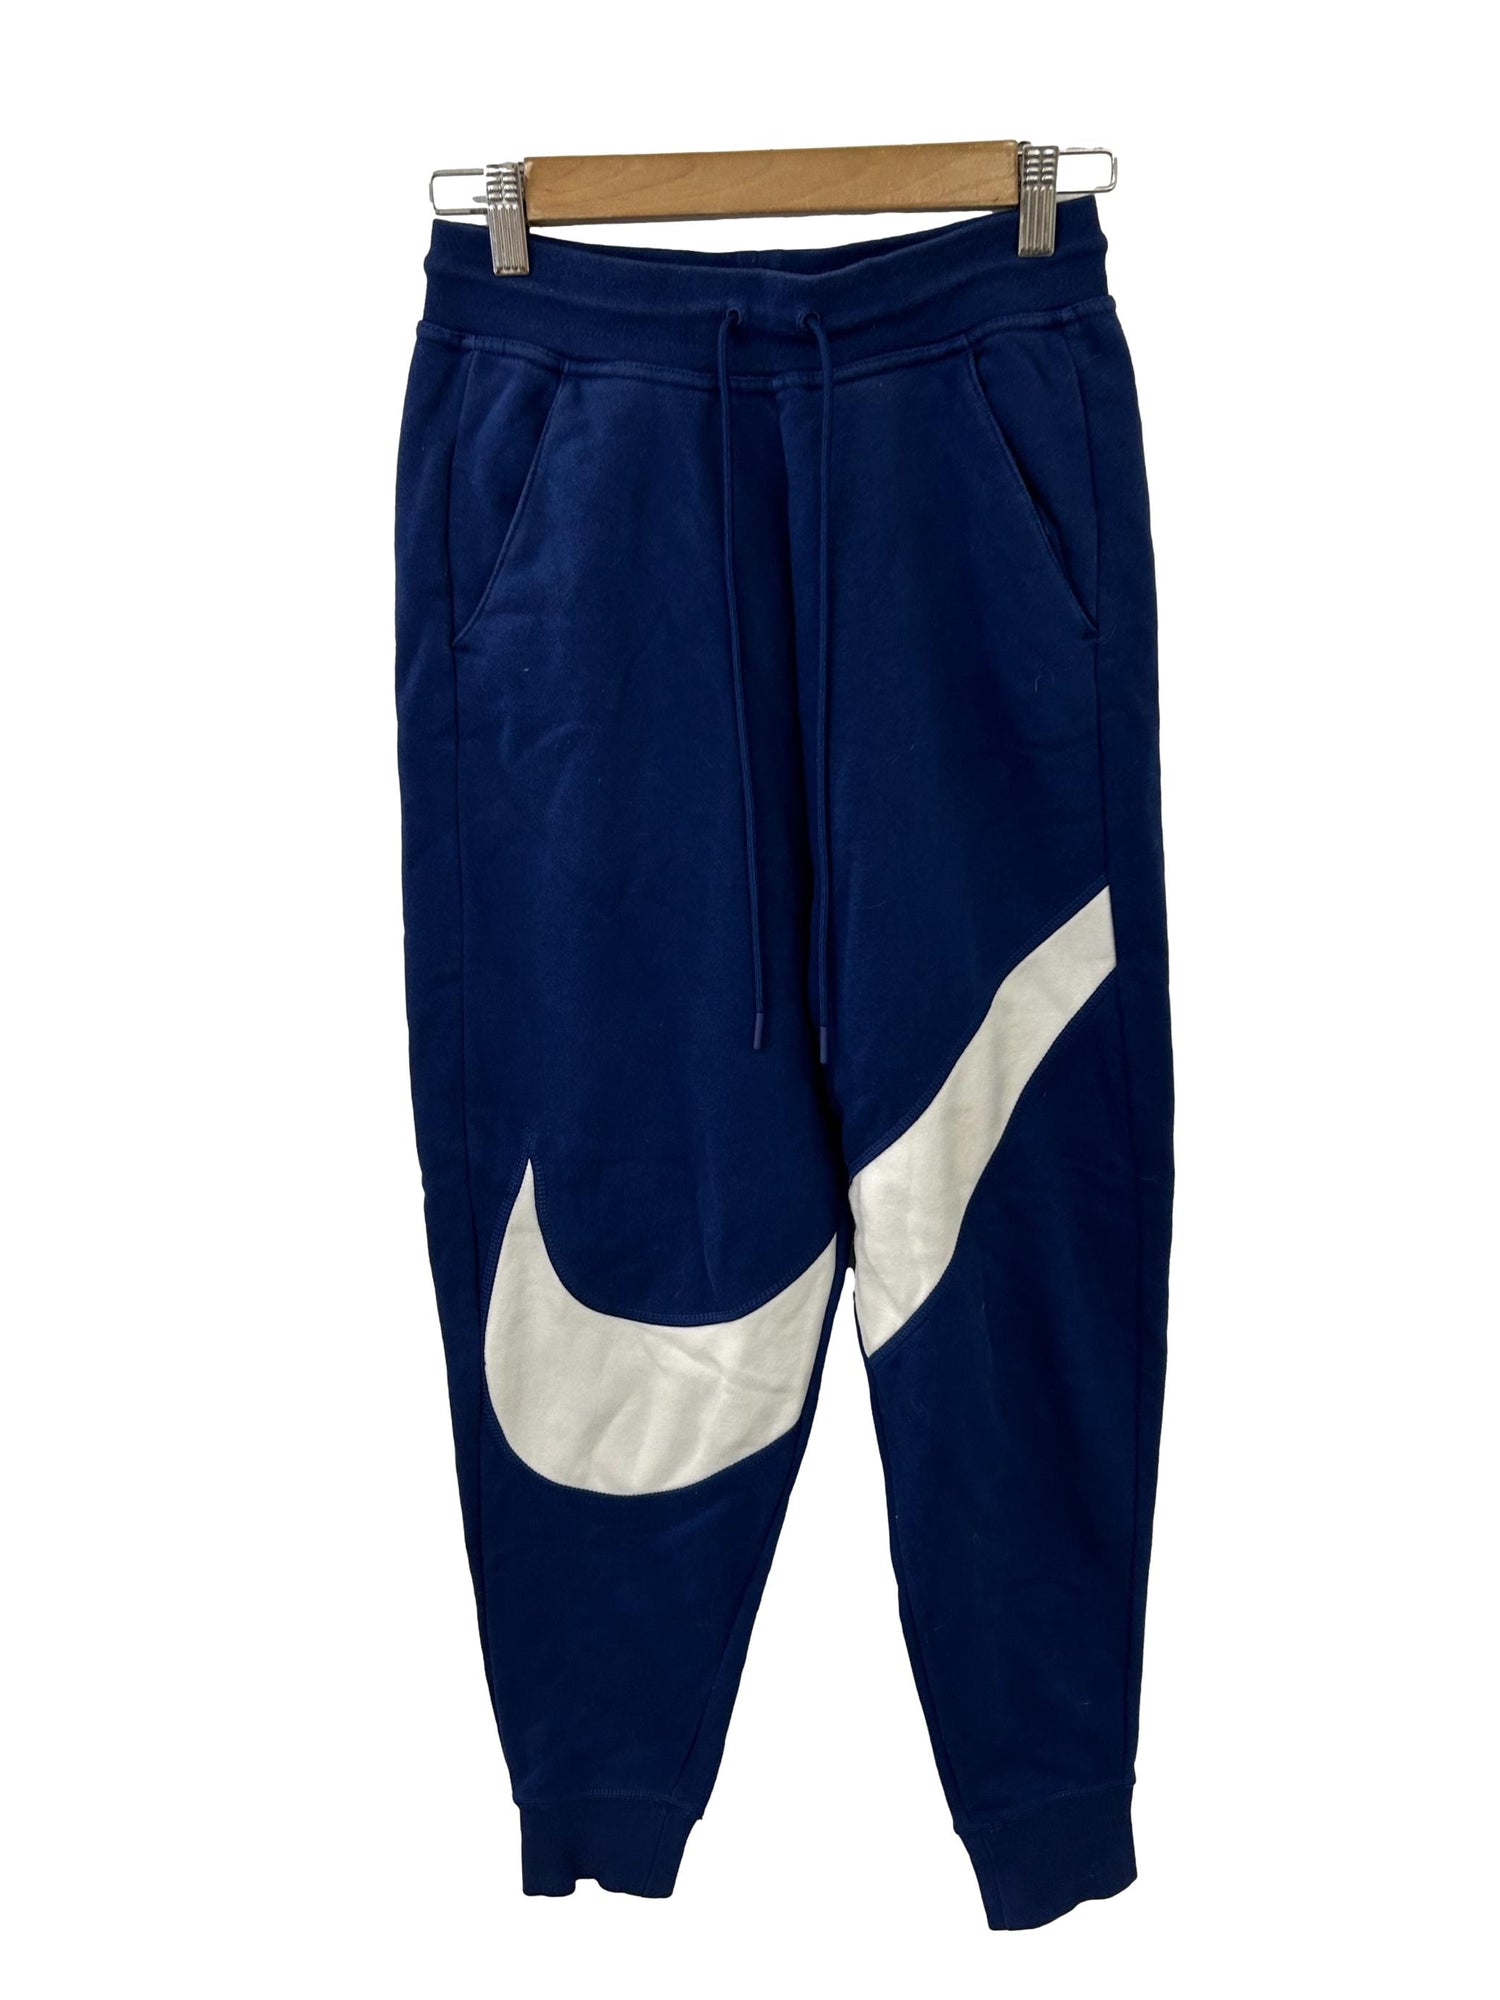 Nike Navy Sweat Pants, Women's Fashion, Bottoms, Other Bottoms on Carousell